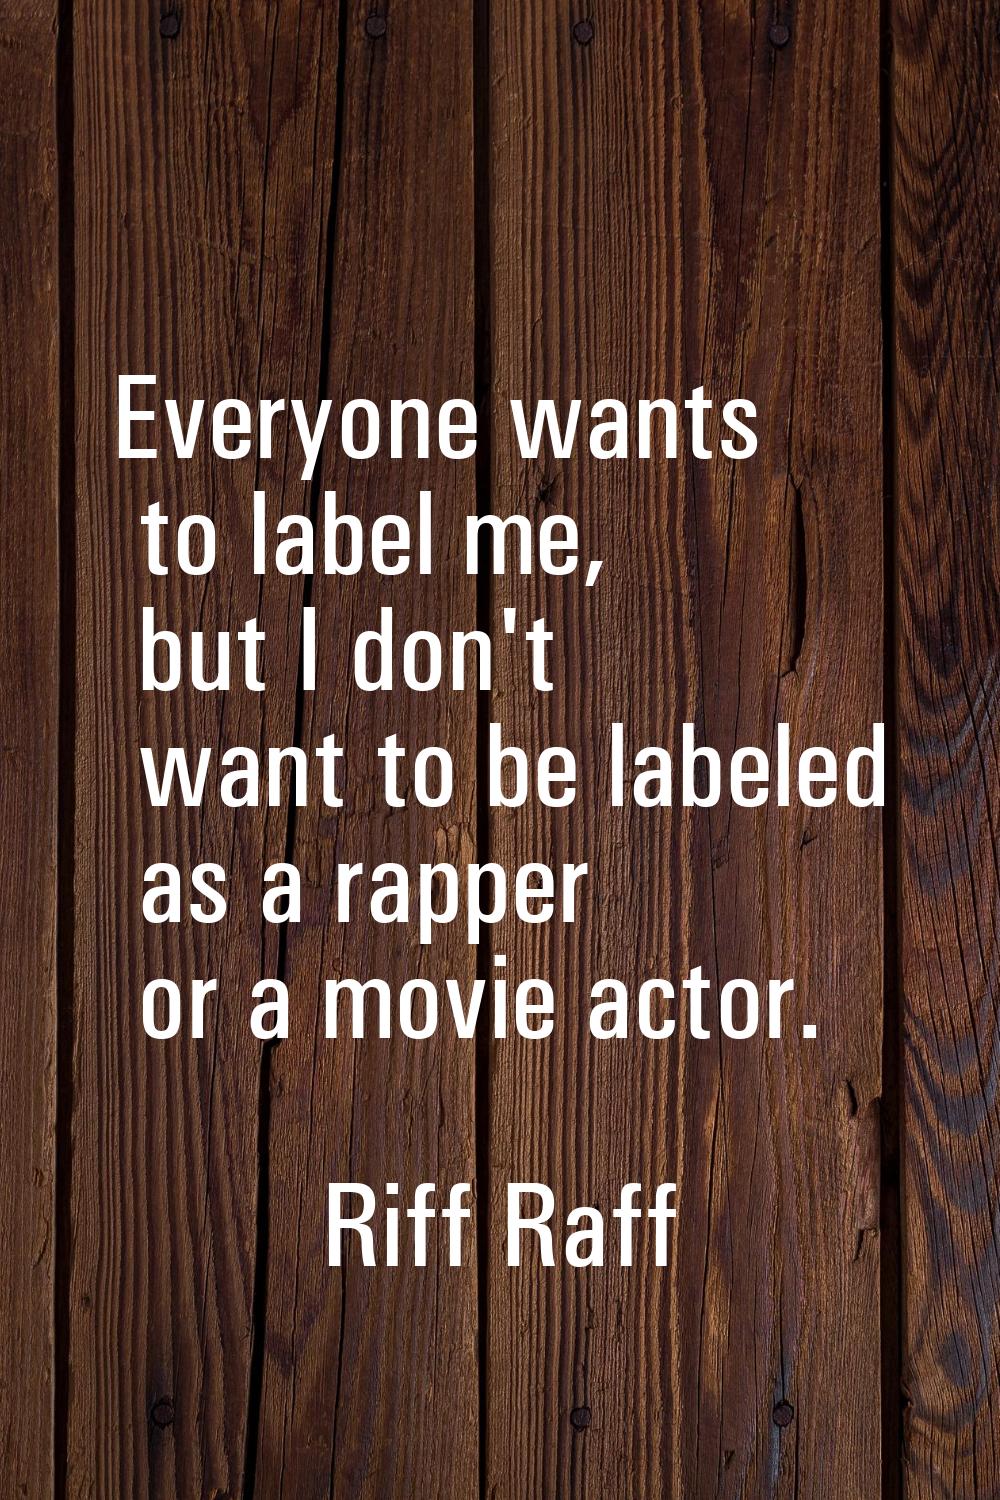 Everyone wants to label me, but I don't want to be labeled as a rapper or a movie actor.